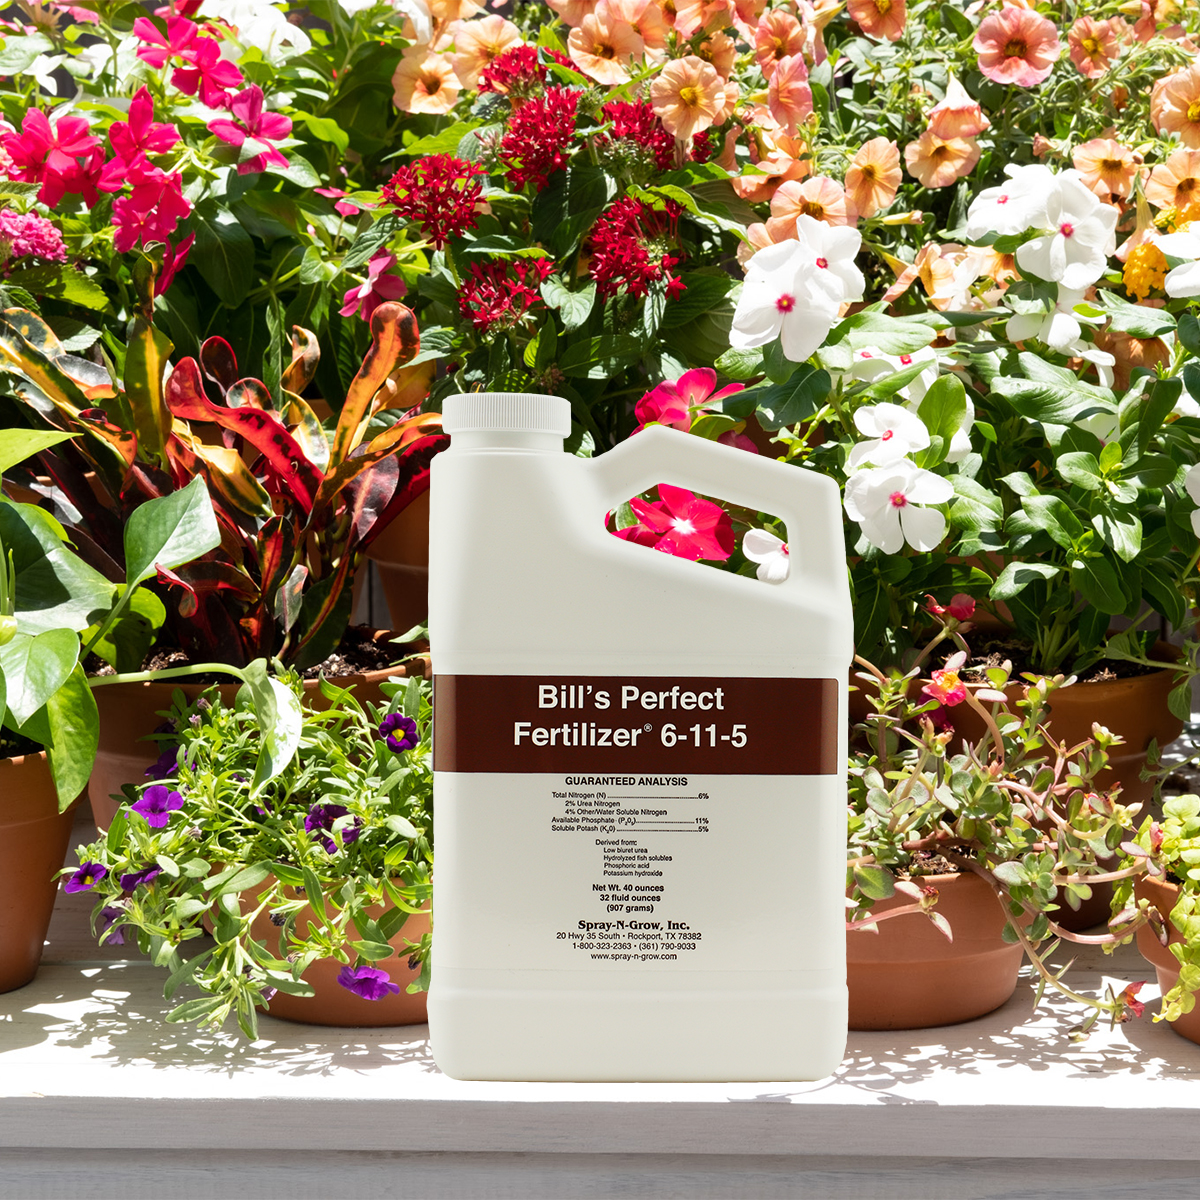 Product Image of Bill's Perfect Fertilizer 6-11-5 32oz